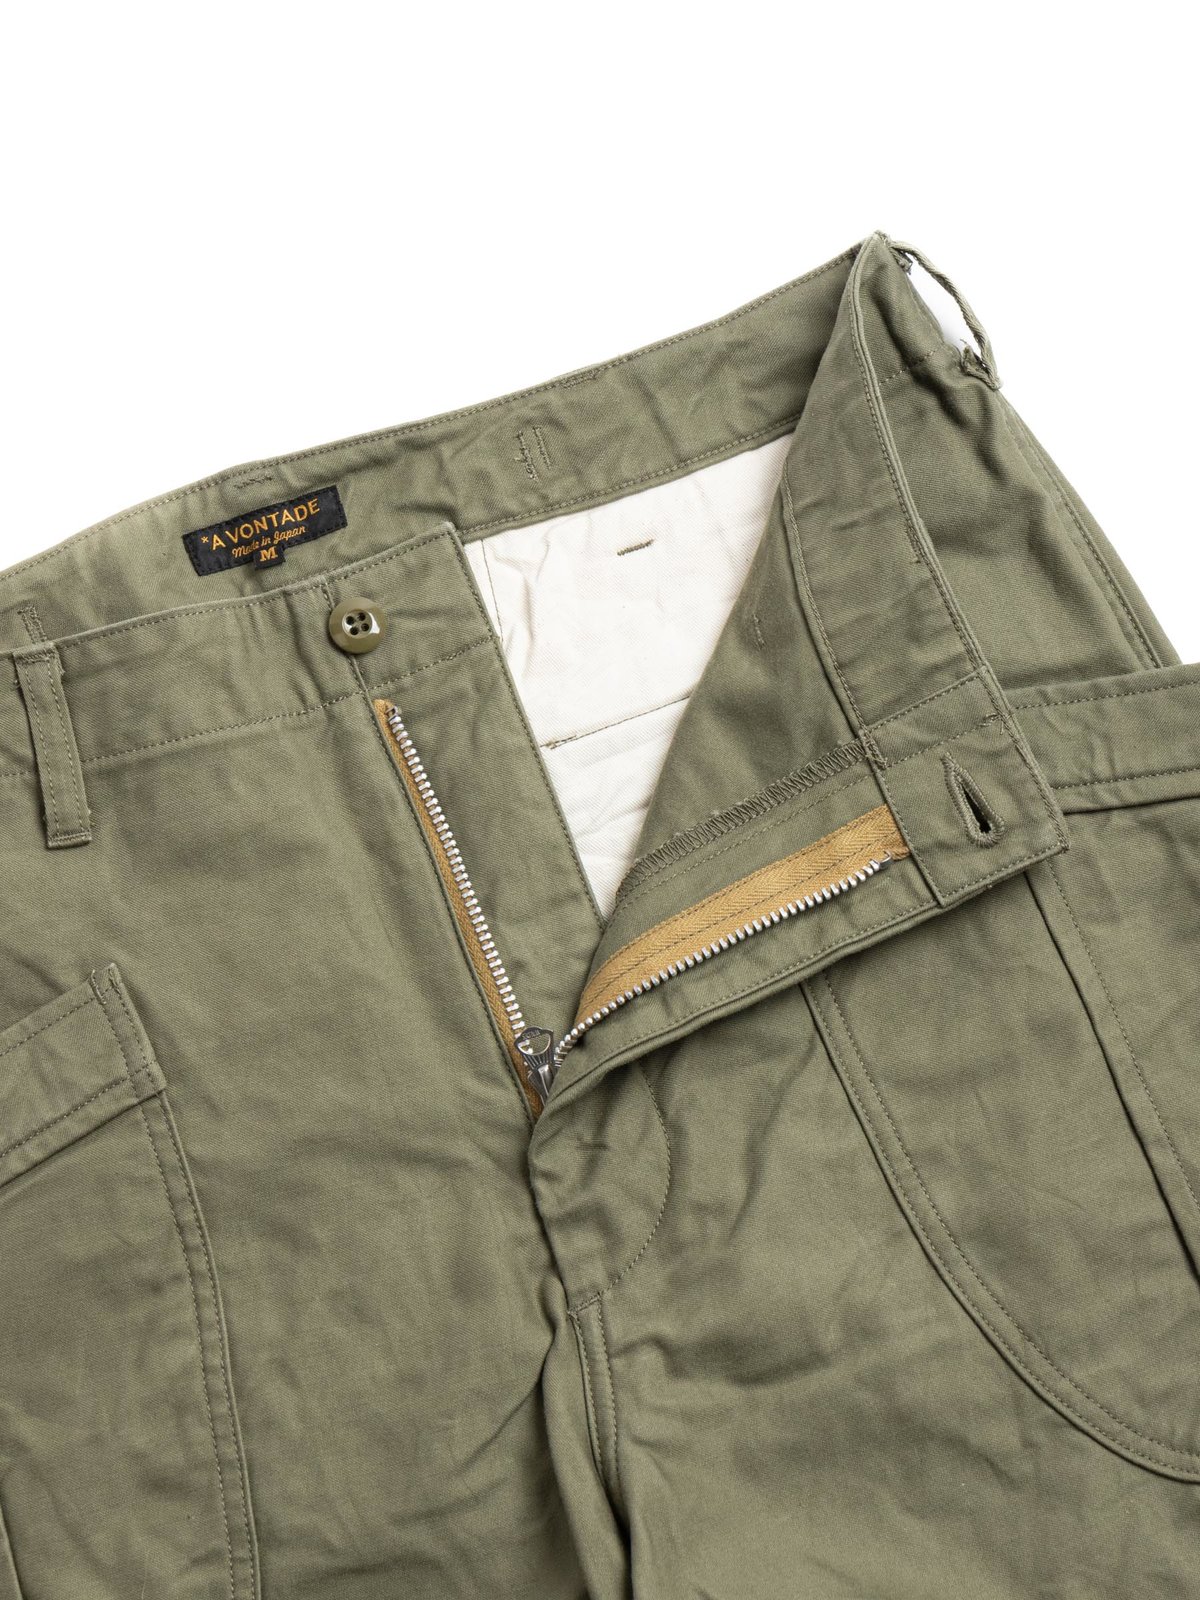 FATIGUE TROUSER OLIVE - Image 3